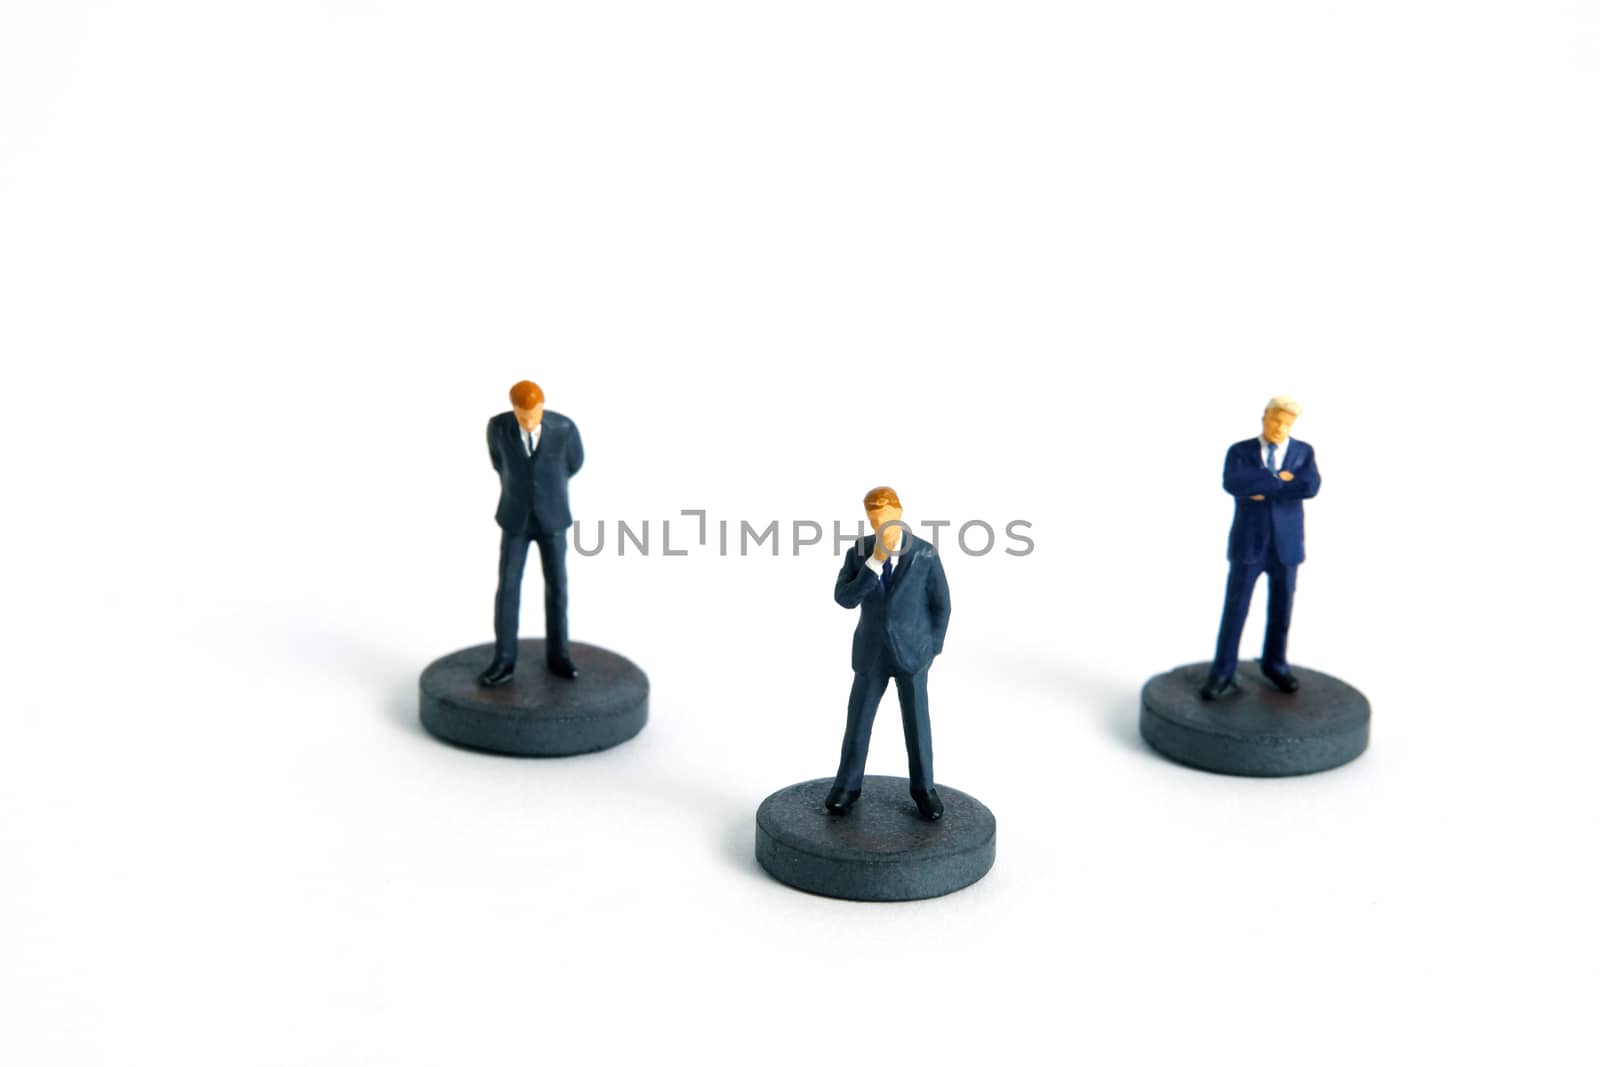 Pandemic coronavirus conceptual social distancing miniature people photography– a businessman stands on circle – a strategy to suppress the spread of viruses. Image Photo